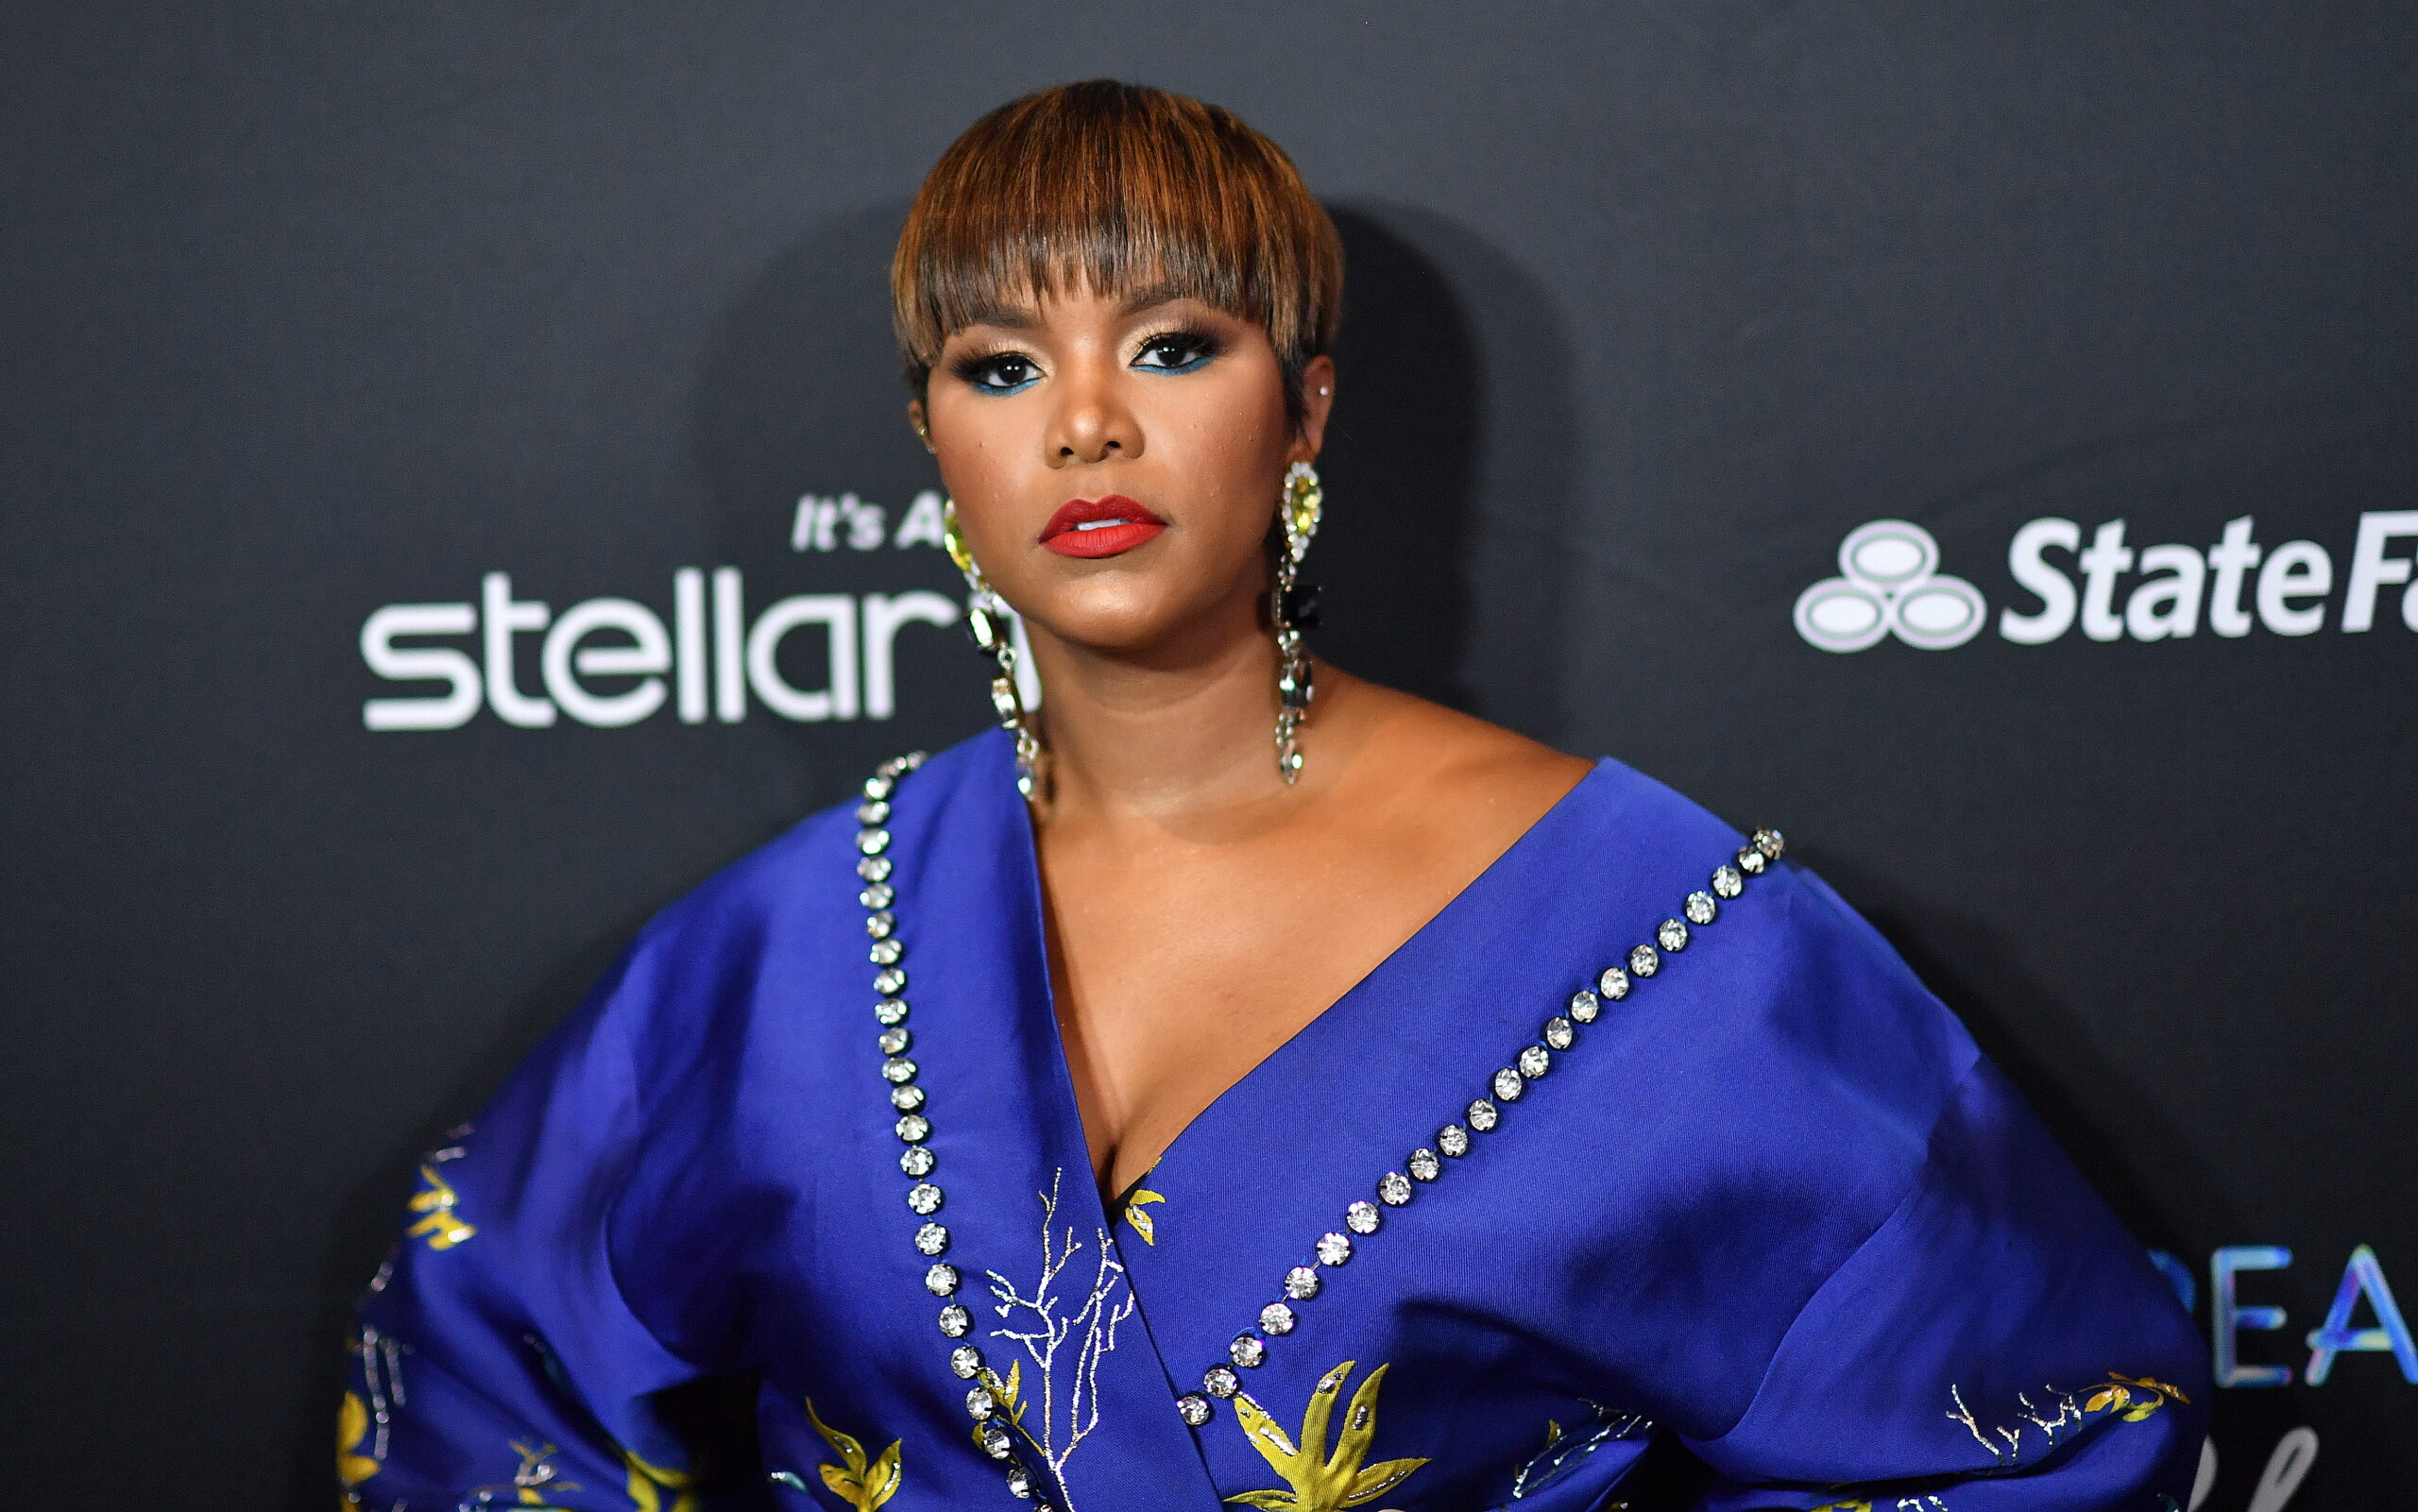 LeToya Luckett’s Daughter Steals the Show In Her Fashion Video 